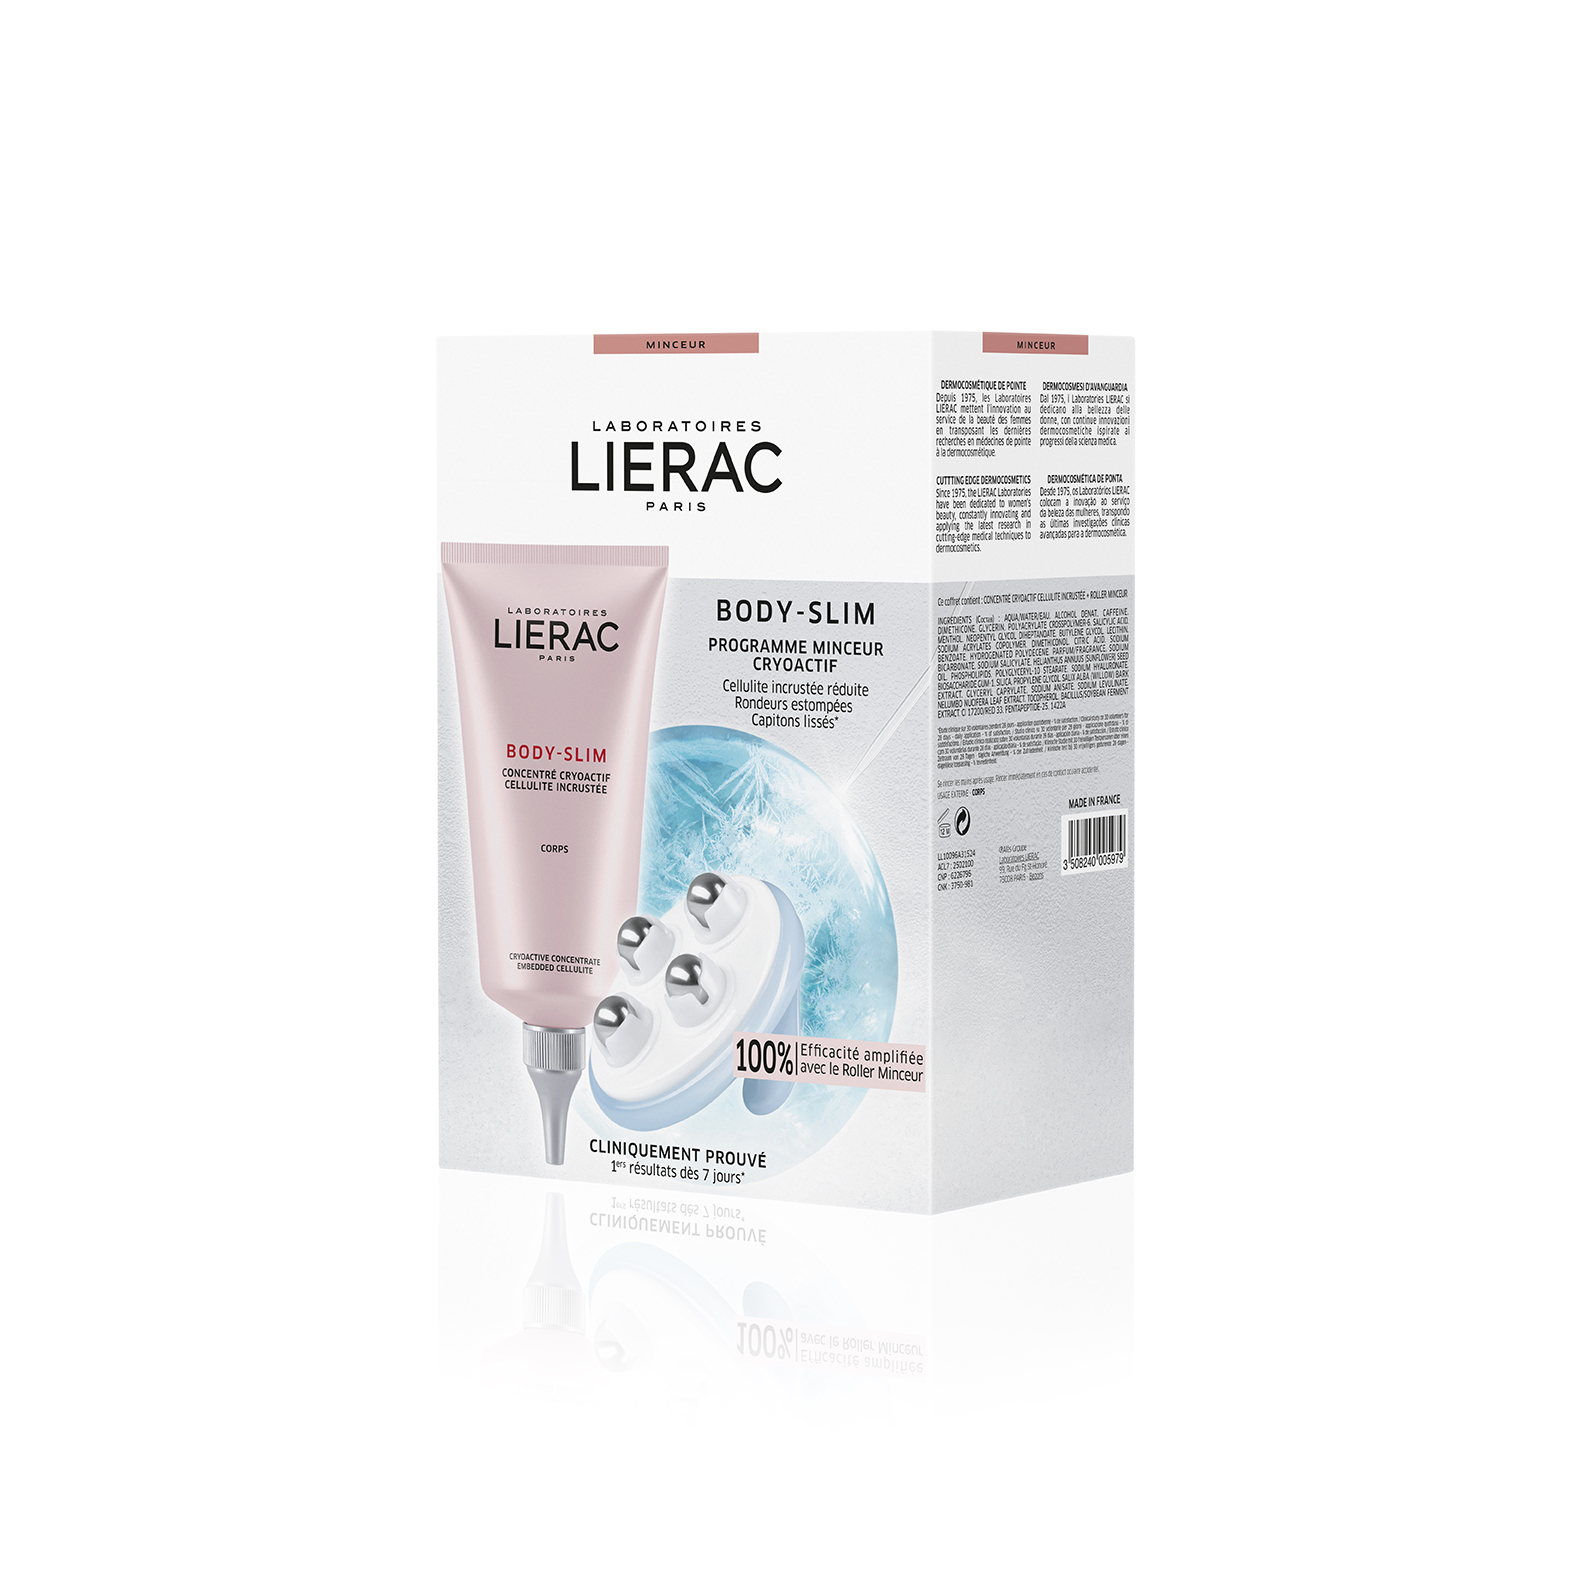 Firm and cellulite-free skin from LIERAC!